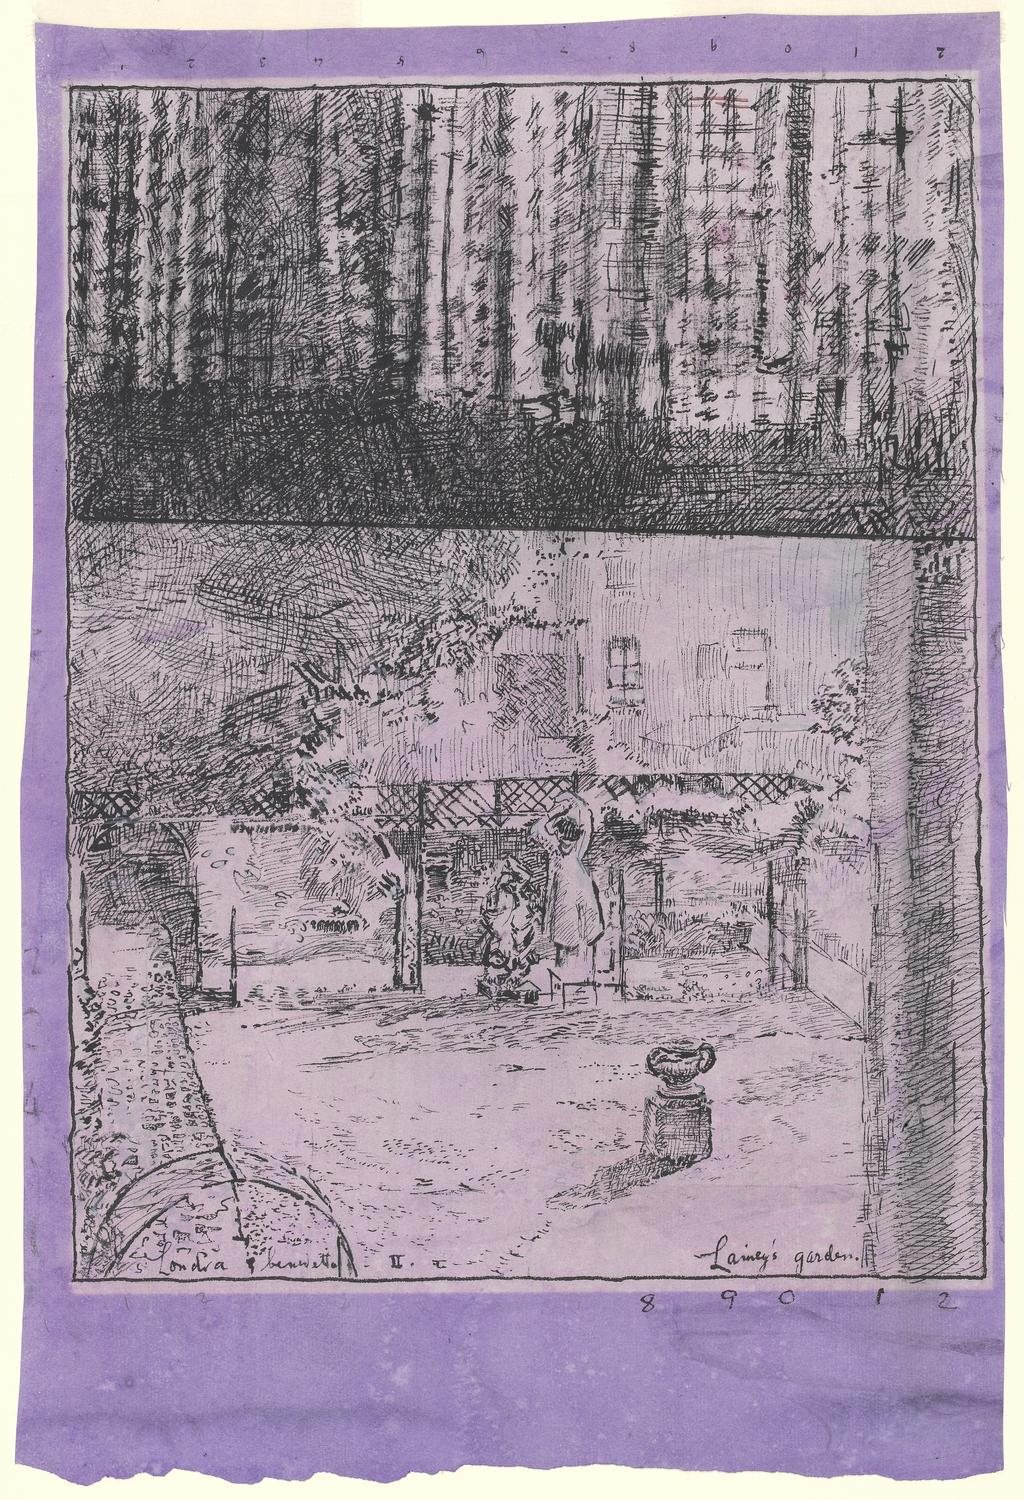 An image of Lainey's Garden. Sickert, Walter Richard. Pen and Indian ink on mauve paper. Height 406 mm, width 308 mm. A study for the oil painting "The Garden of Love" (no. 2726). Circa 1927-1931.